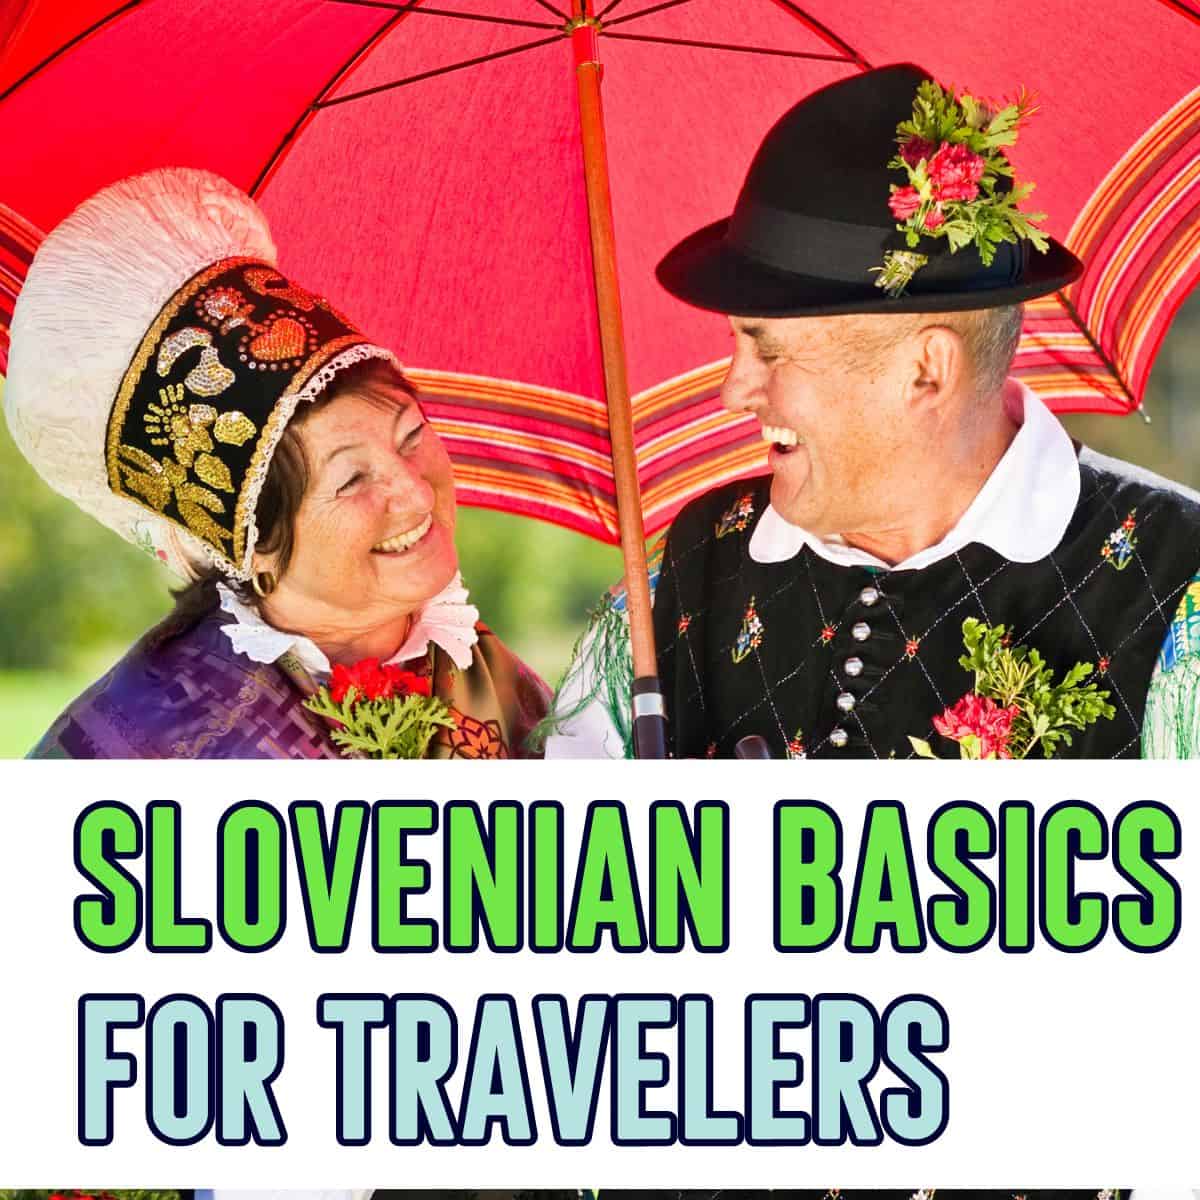 List of essential Slovenian travel phrases to learn Slovenian language basics for your trip to Slovenia. Easy Slovenian words for anyone interested in learning Slovenian language. From how to say thank you in Slovenian, to phrases for ordering food and words for going around for easy navigation when in Slovenia. FREE DOWNLOAD. Slovenia travel | Visit Slovenia | Slovenian travel phrases | Basics Slovenian words | Europe #traveljournal #travelbujo #slovenian #slovenianlanguage #travelphrases